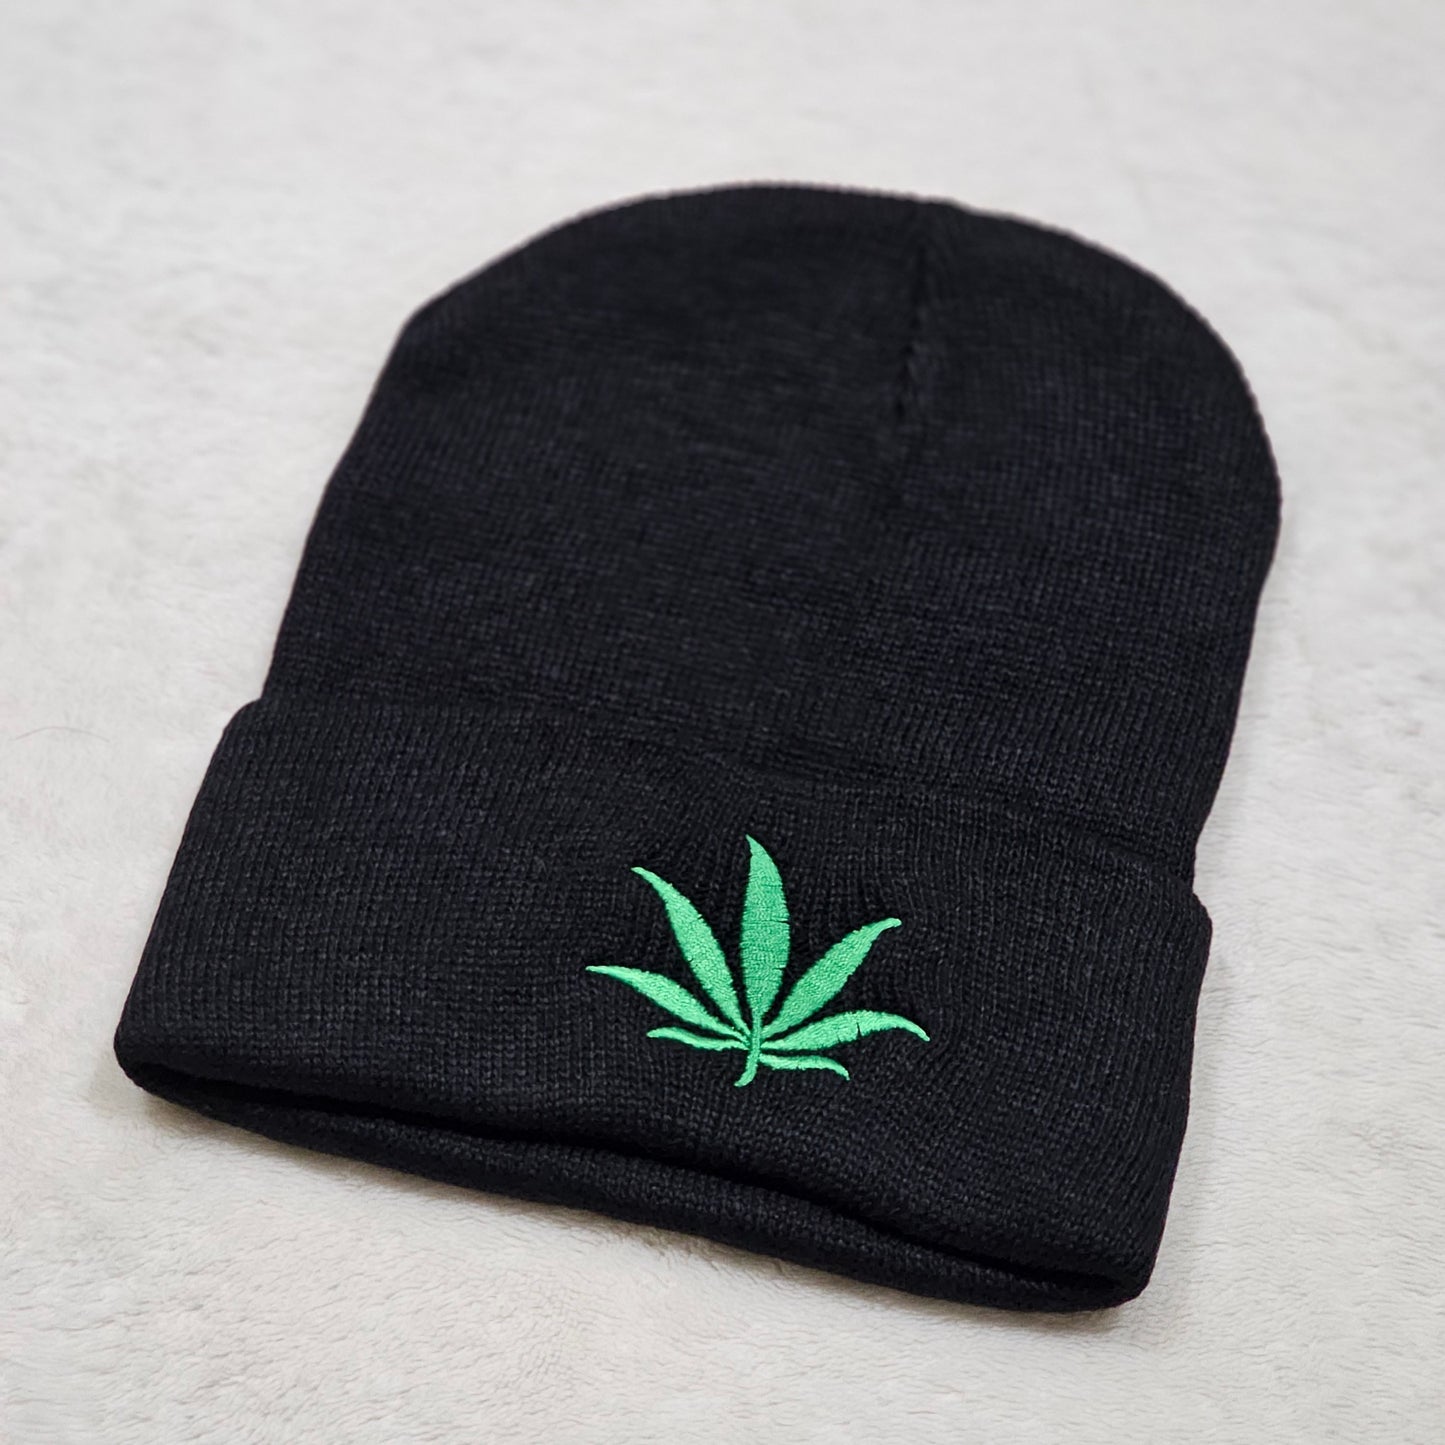 Unisex Embroidered Weed Leaf Beanie | Solid Black with Green Pot Leaf at Front - A Gothic Universe - Beanies